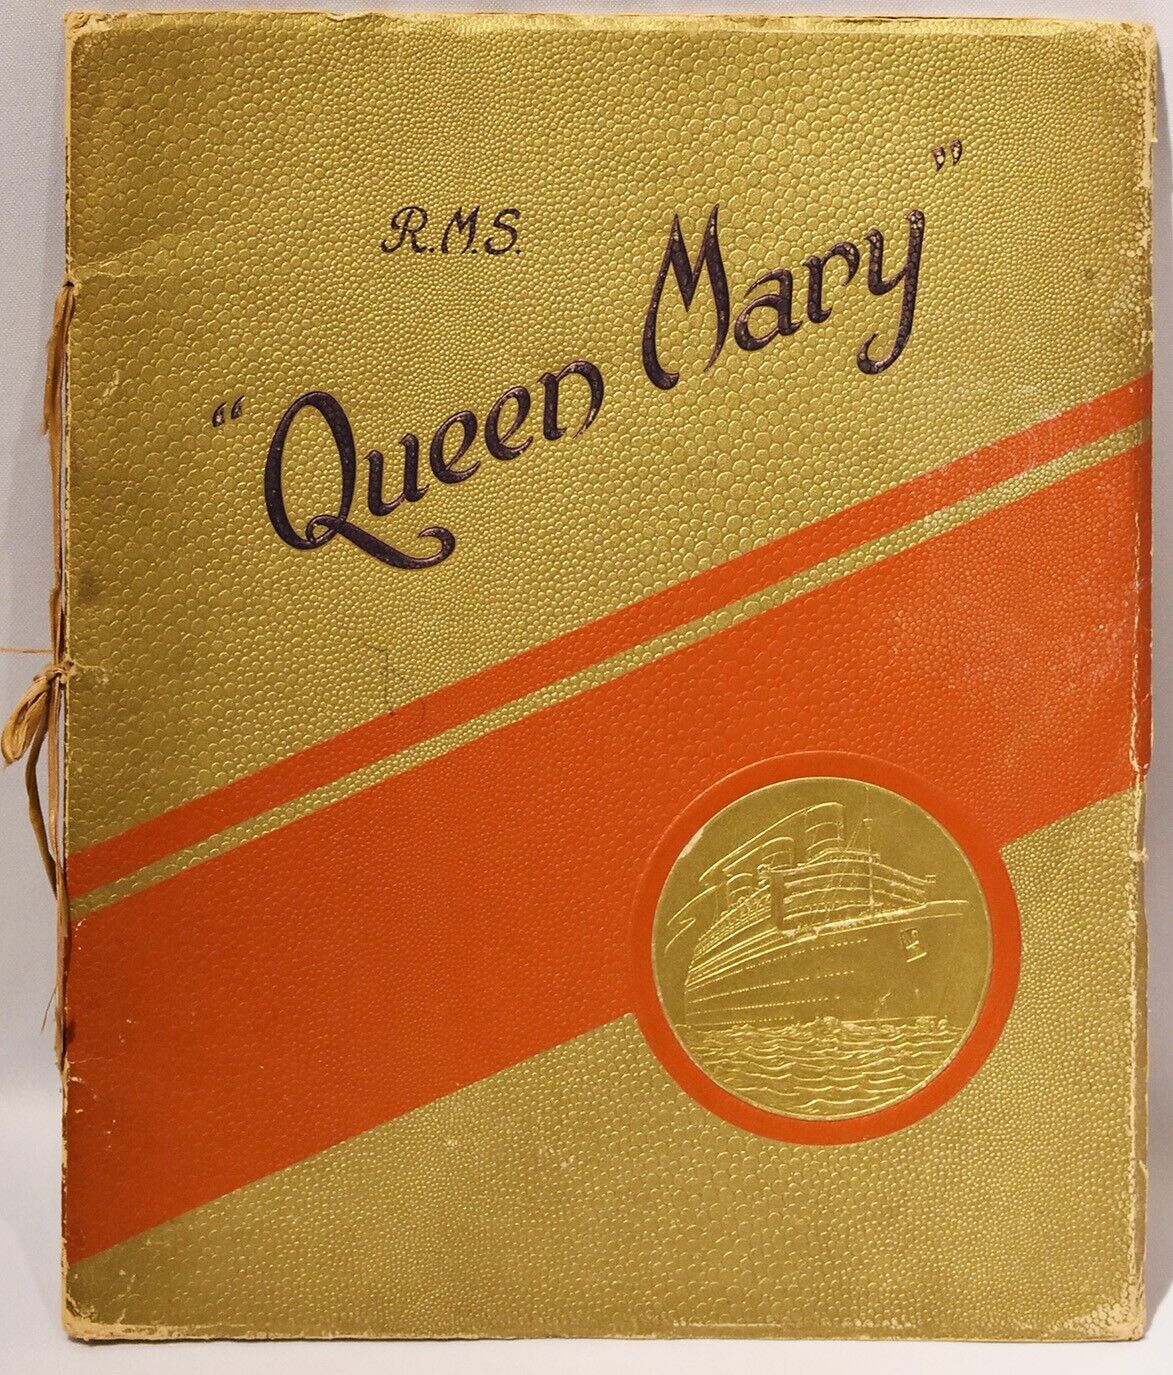 Ocean Liner Collectables: RMS Queen Mary, Tomlinson, H.M. Cunard White Star 1934